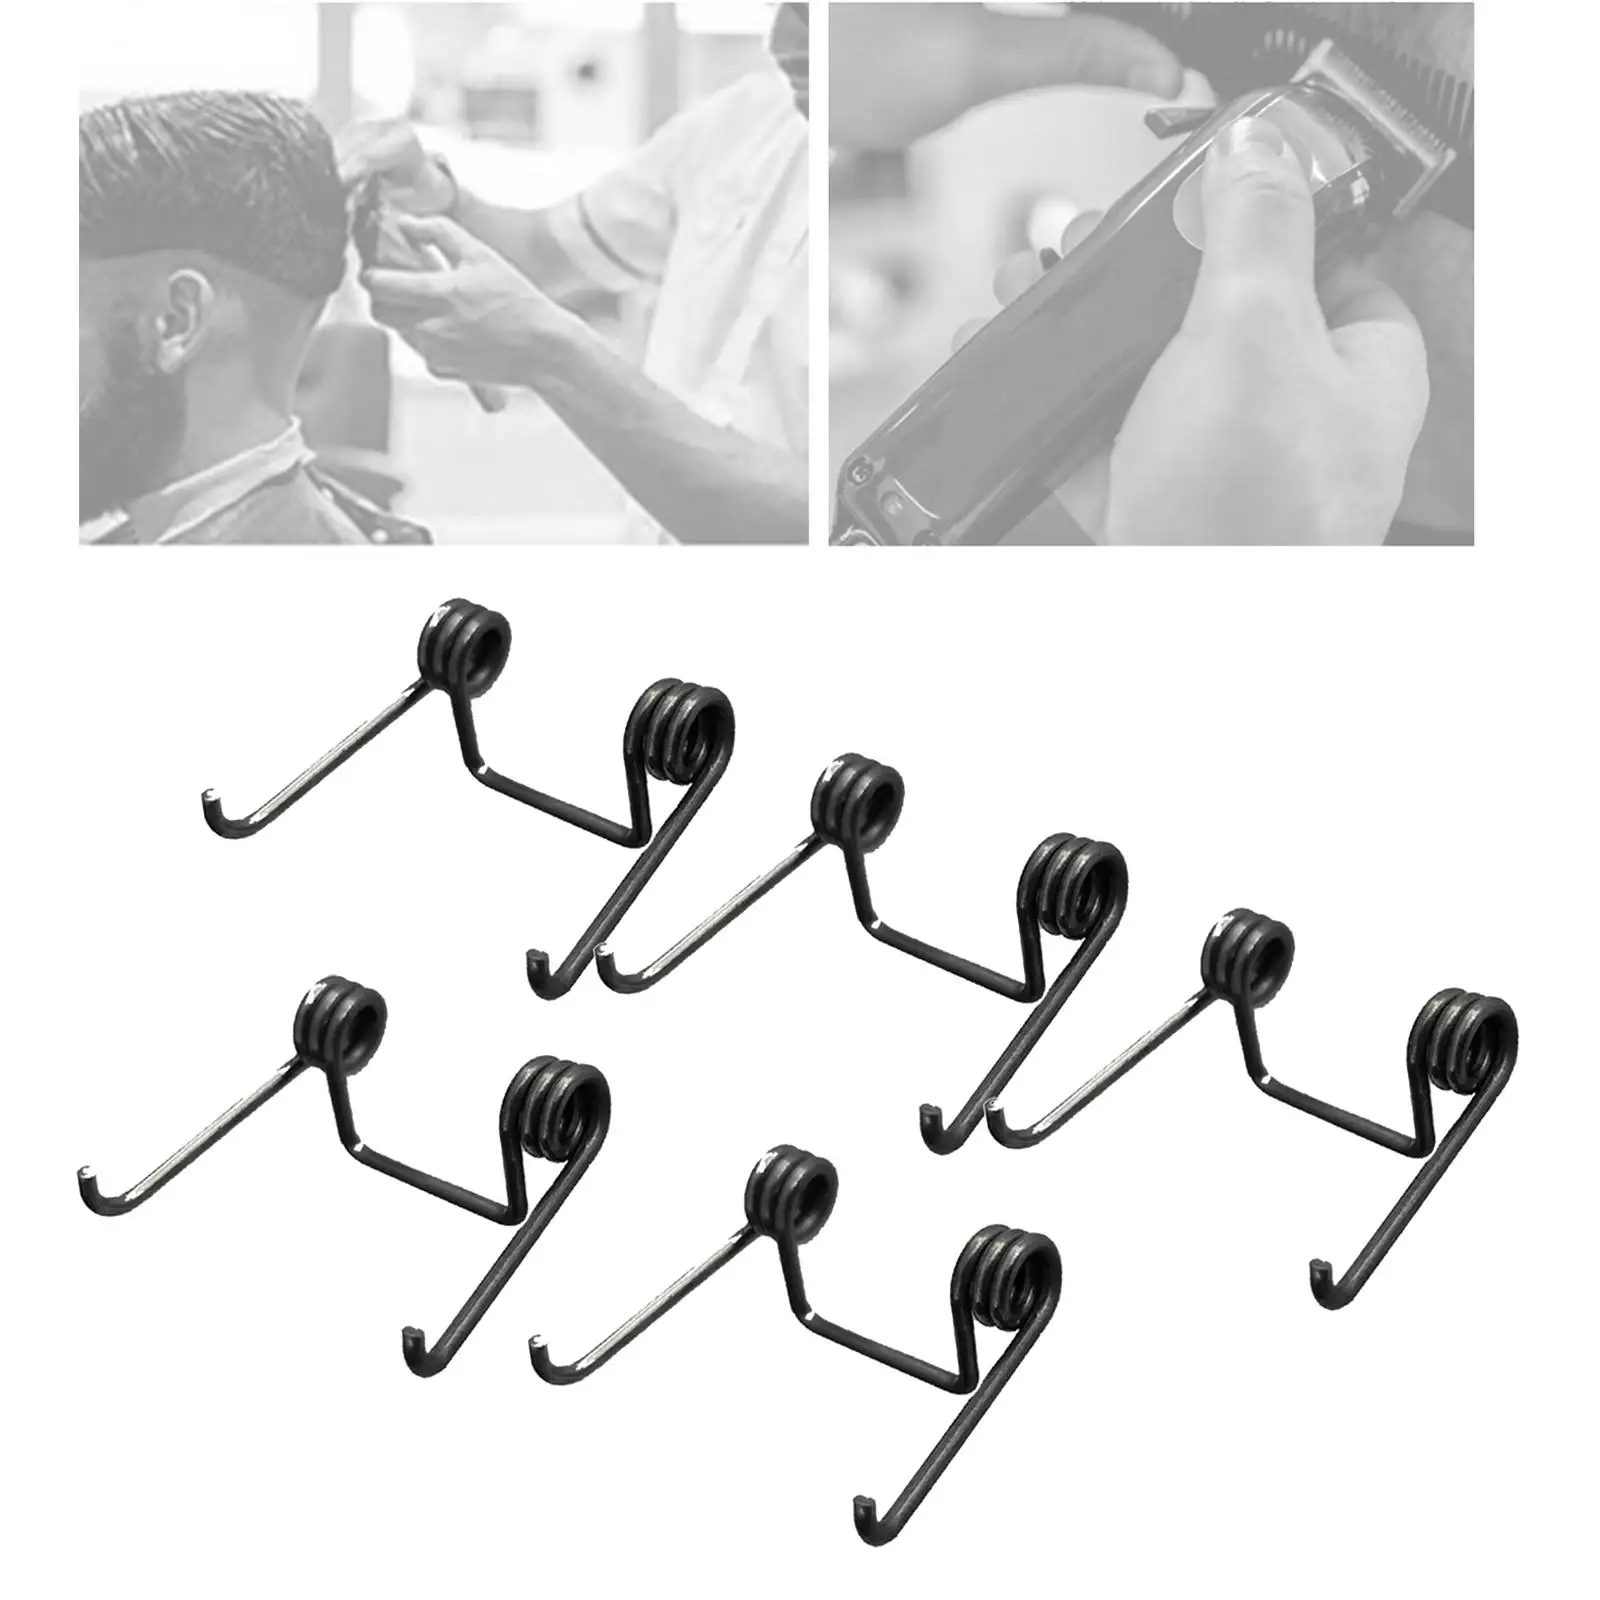 5 pcs Hair Replacement spring fit for 8148 8591 Coldless Clip Parts